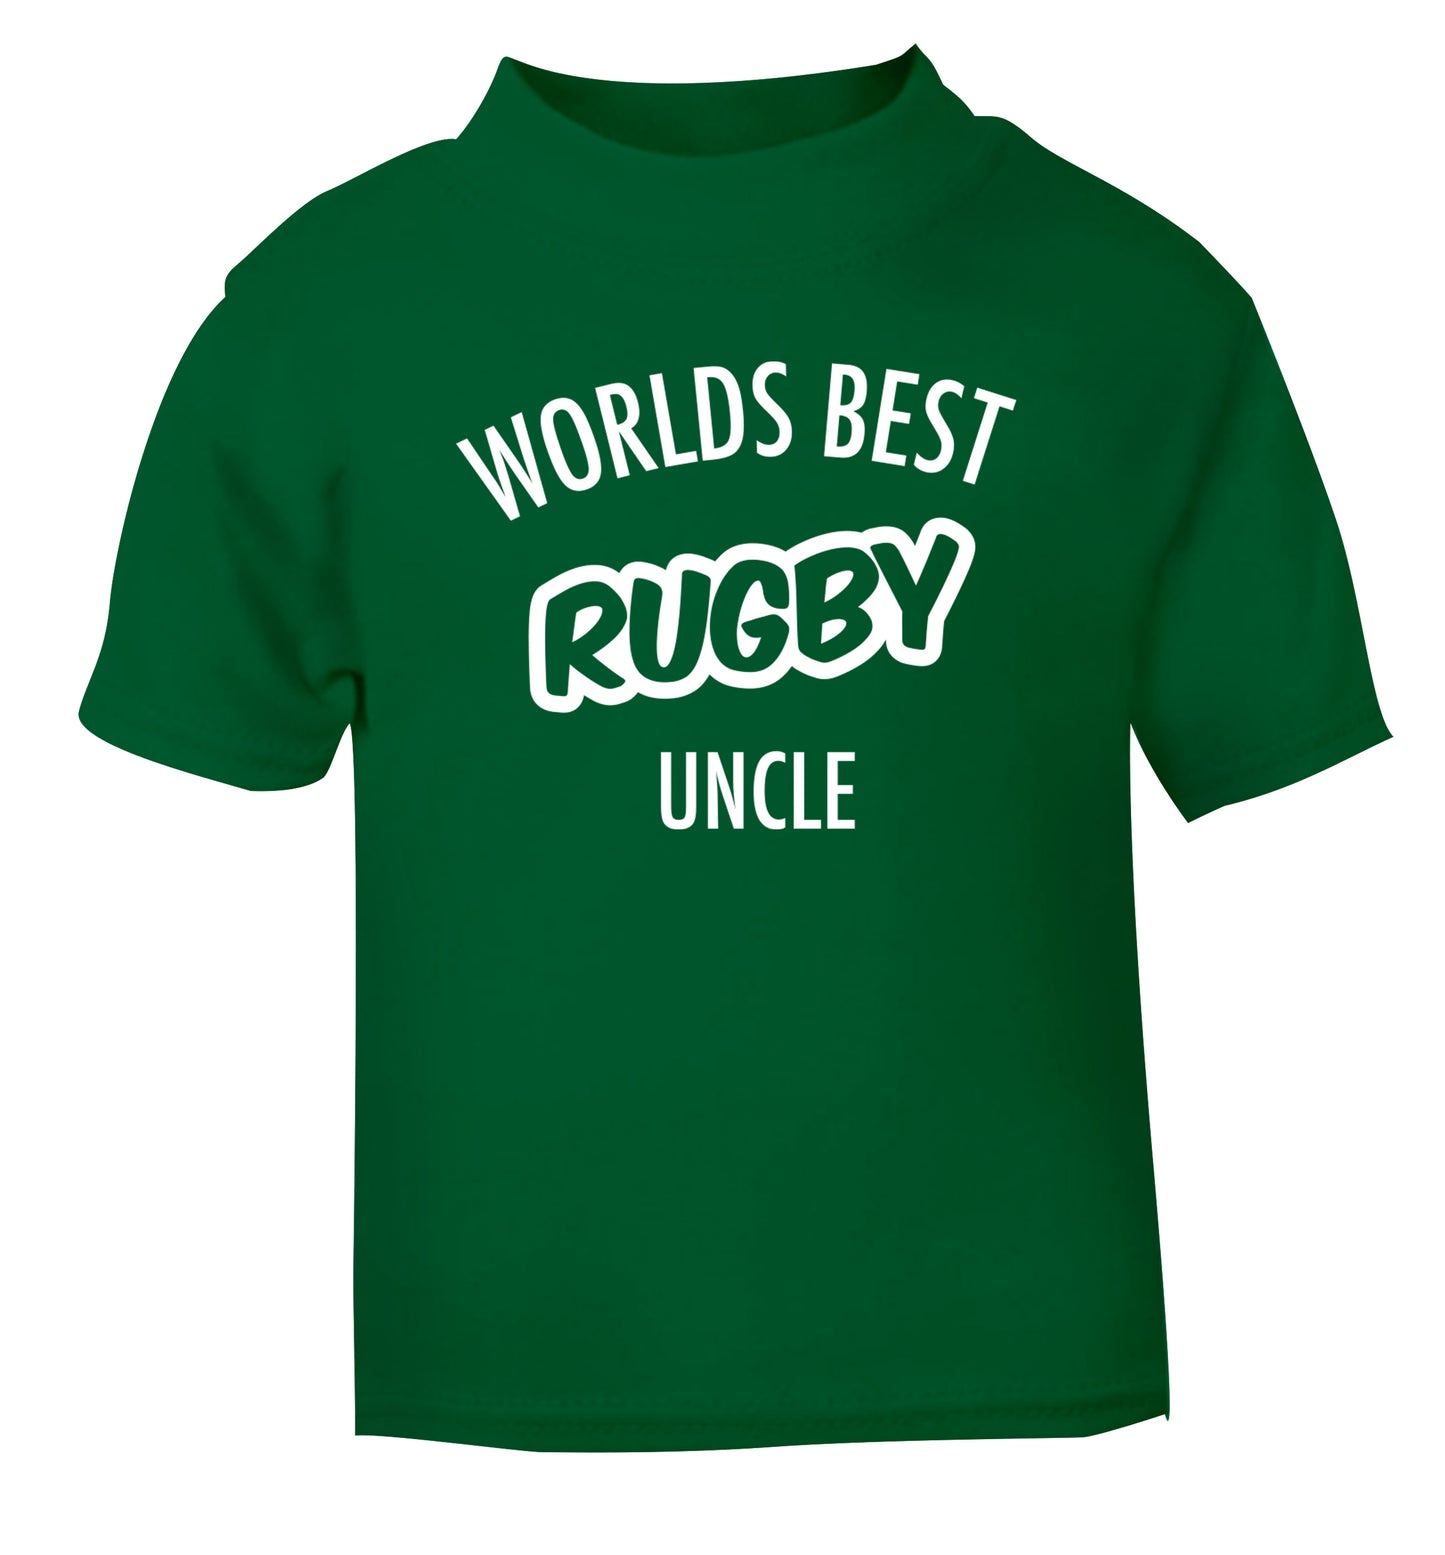 Worlds best rugby uncle green Baby Toddler Tshirt 2 Years